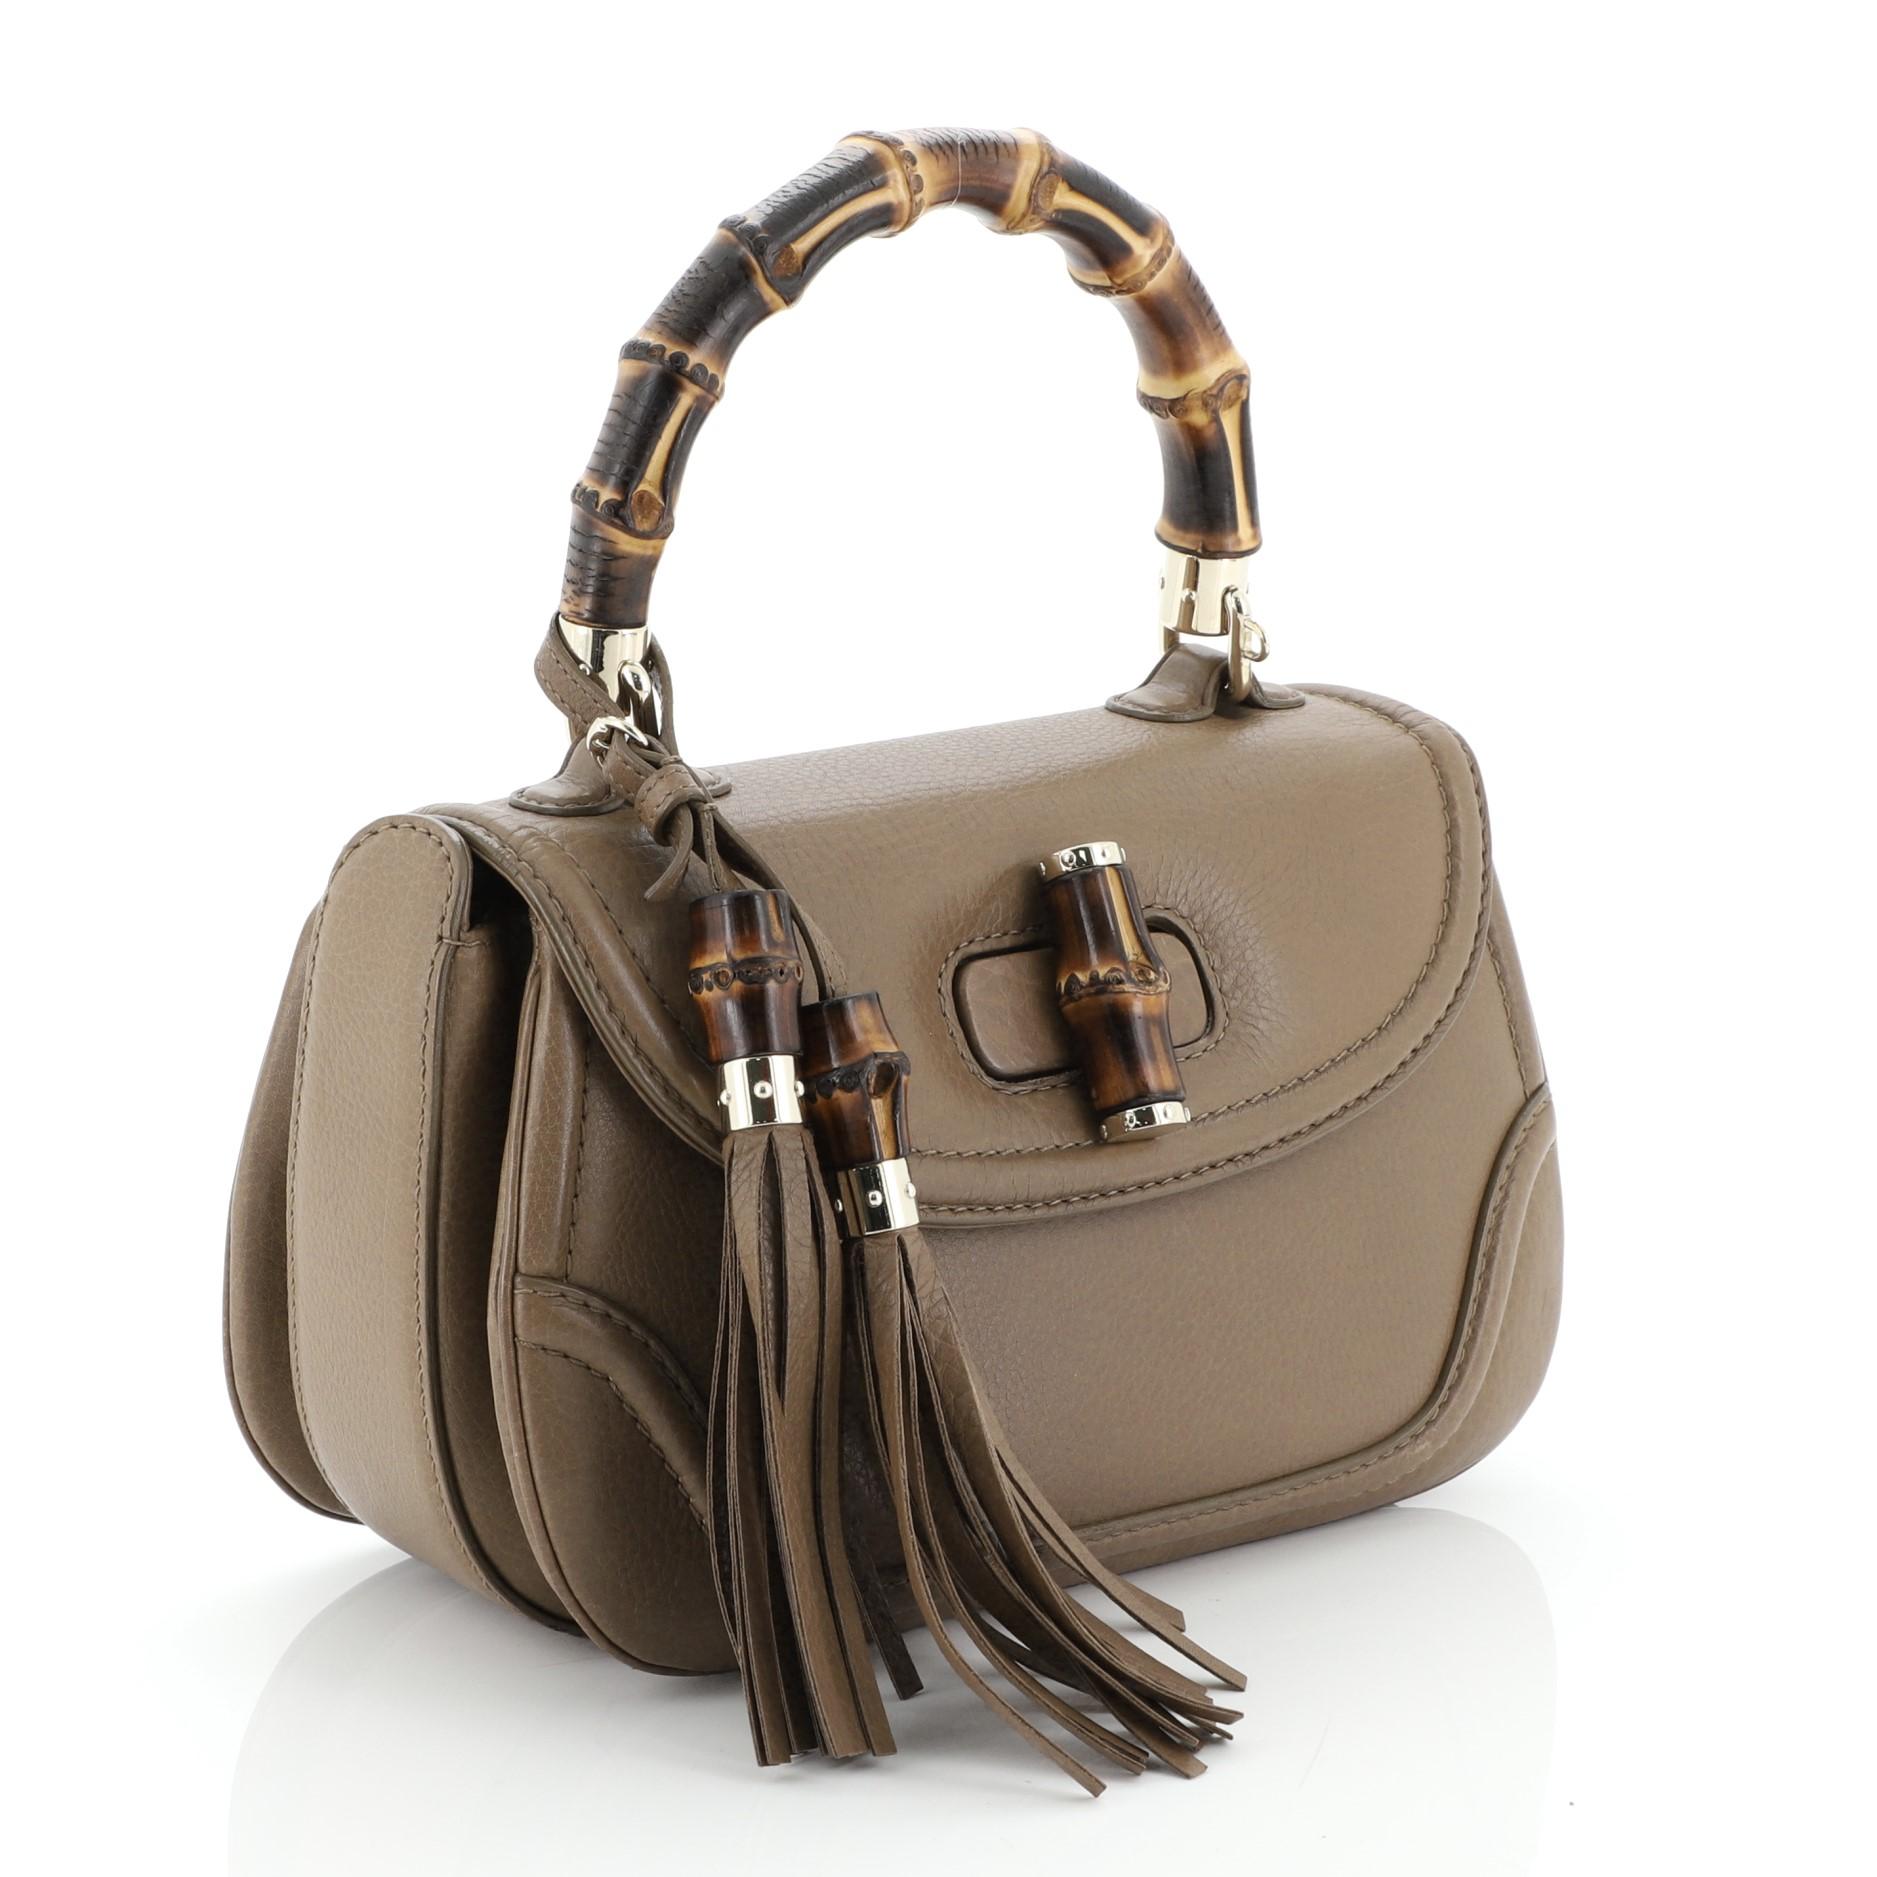 This Gucci New Bamboo Convertible Top Handle Bag Leather Medium, crafted in neutral leather, features a bamboo top handle, leather trim and gold-tone hardware. Its bamboo turn-lock closure opens to a neutral fabric interior with side zip and slip